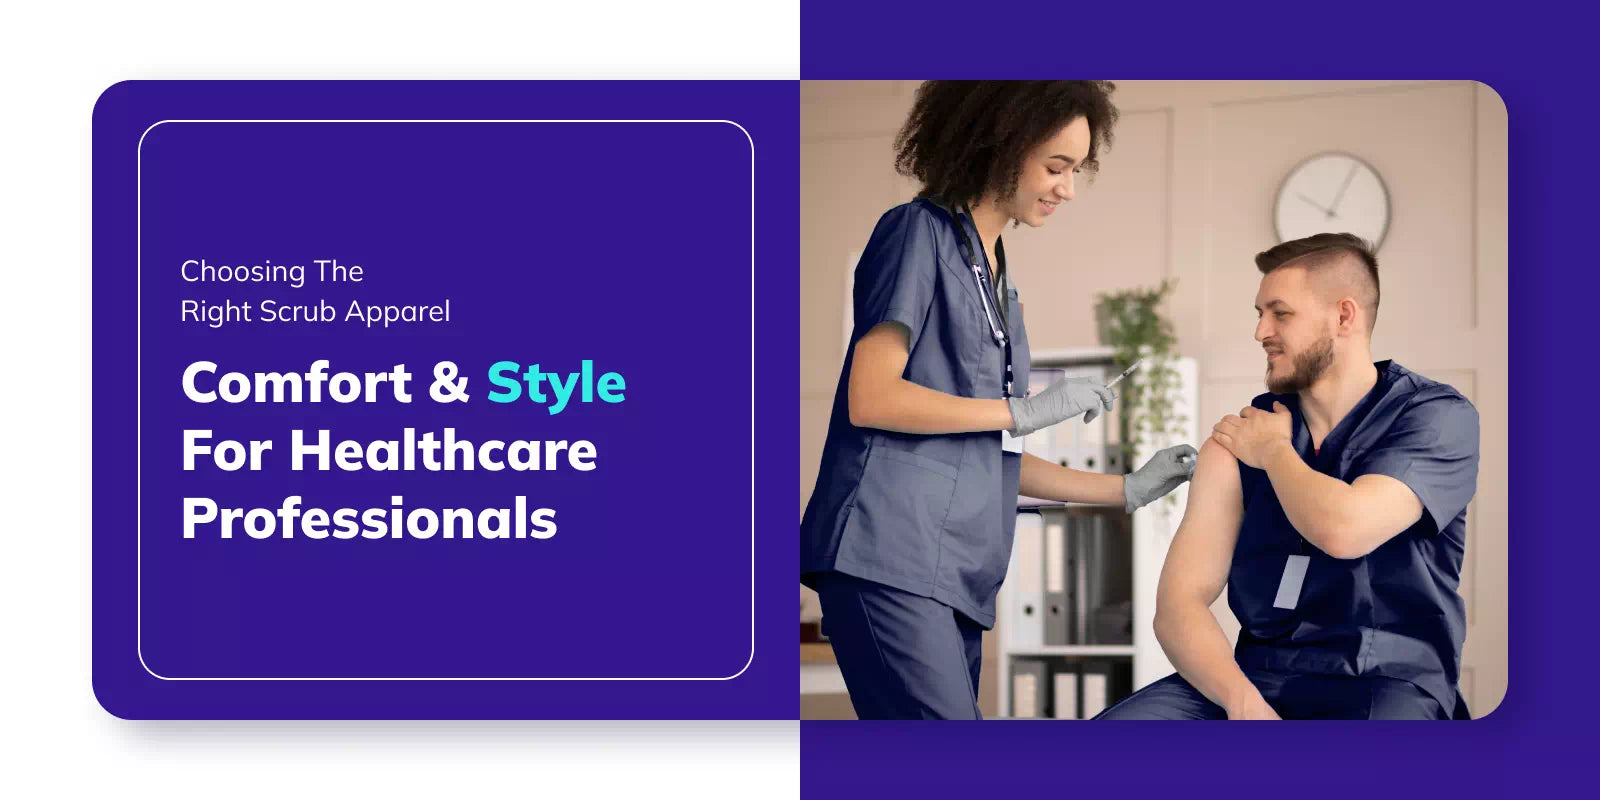 Choosing the Right Scrub Apparel: Comfort and Style for Healthcare Professionals